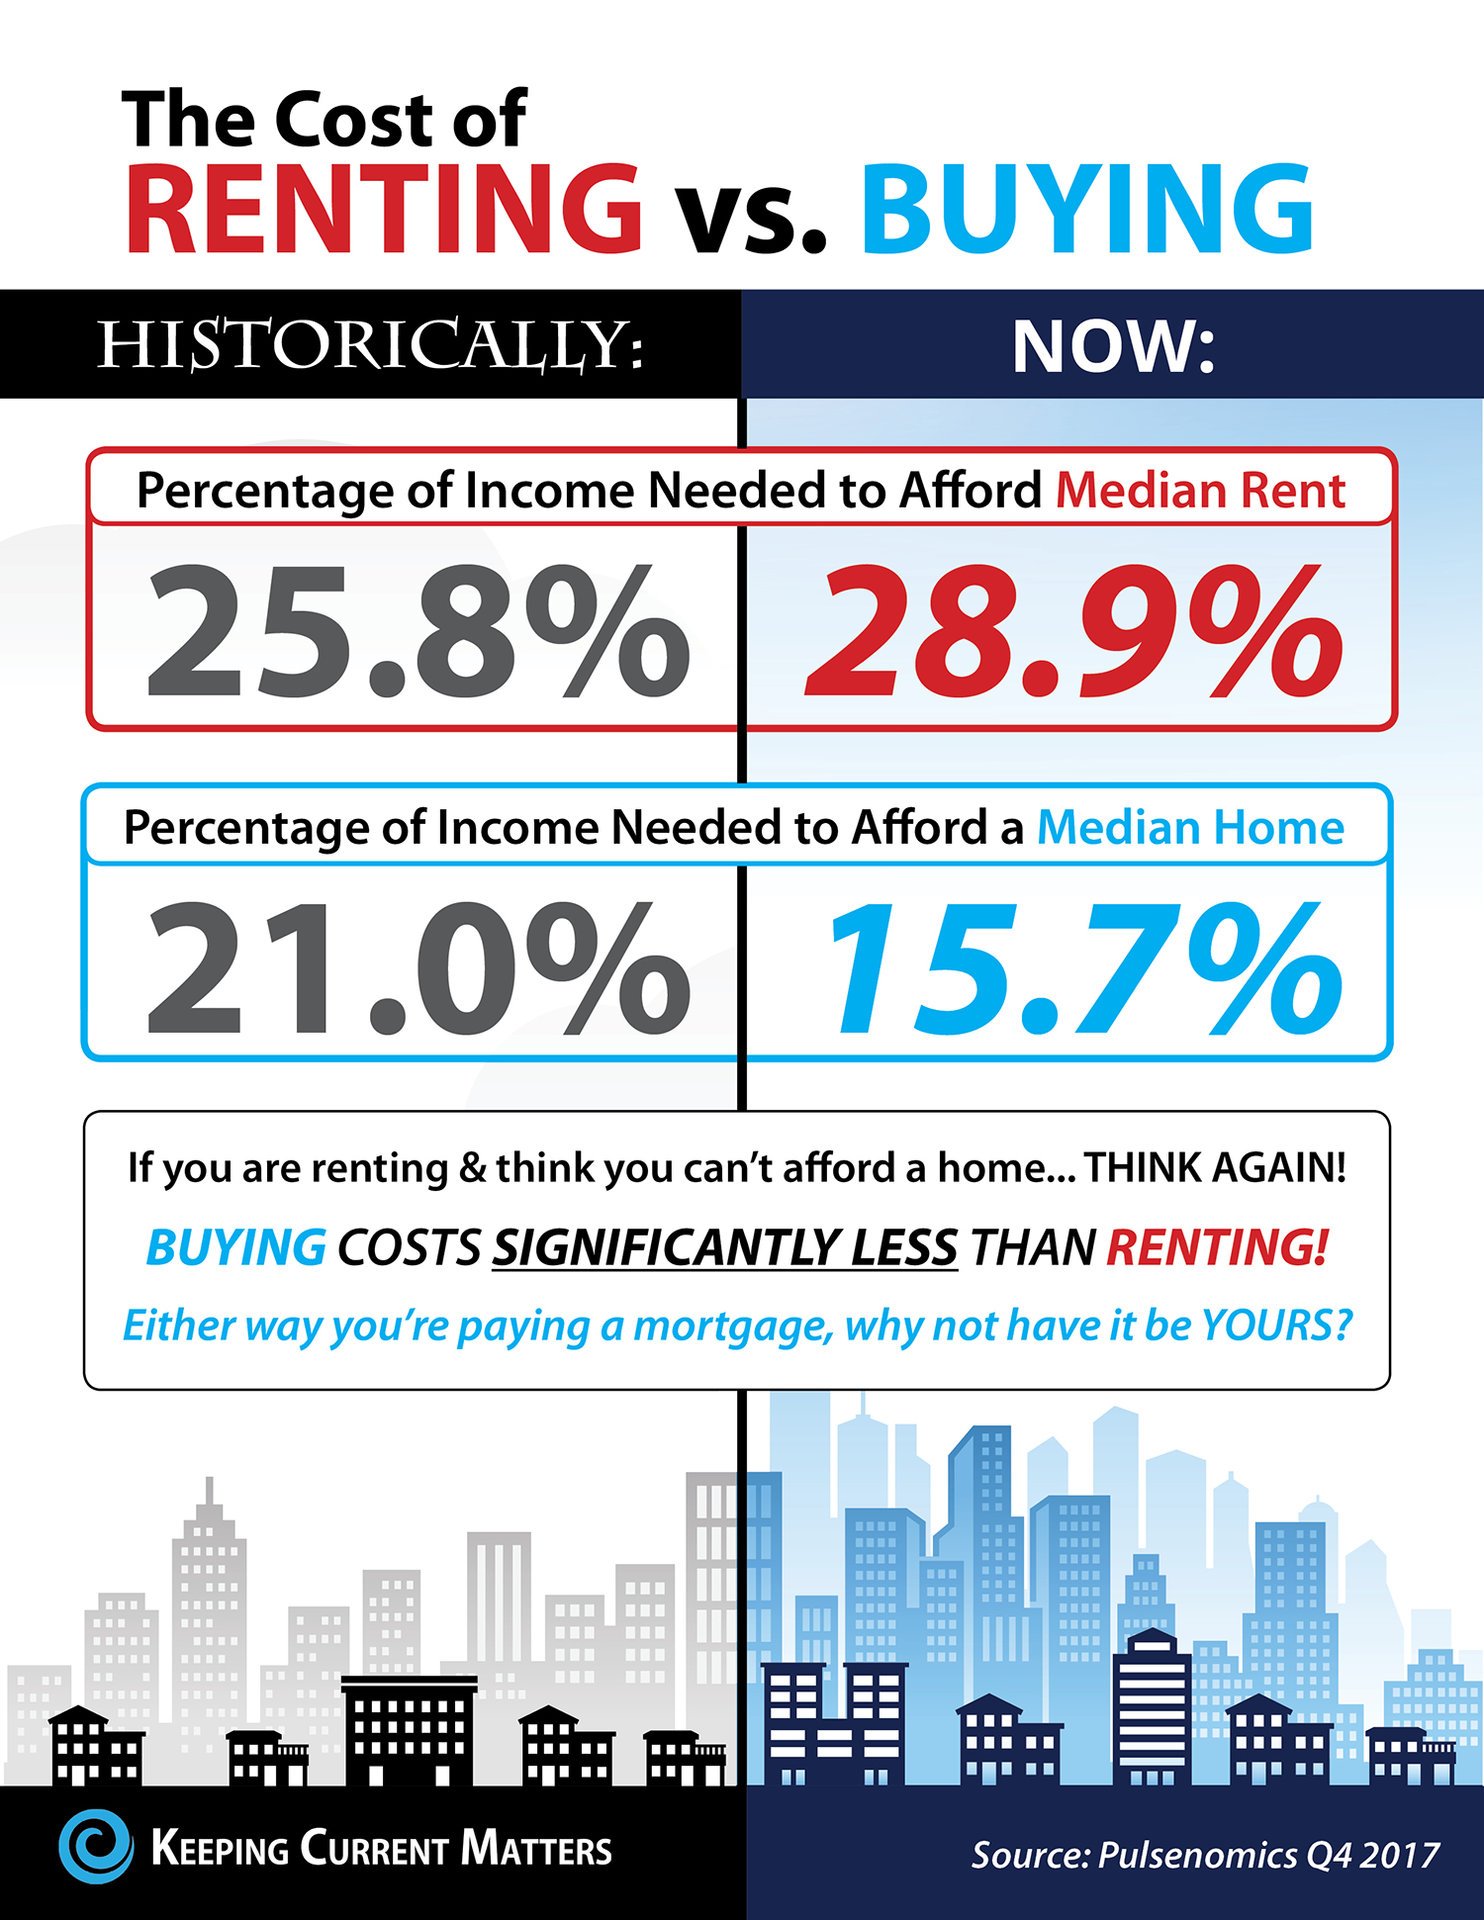 The Cost of Renting vs. Buying Today [INFOGRAPHIC] | Keeping Current Matters